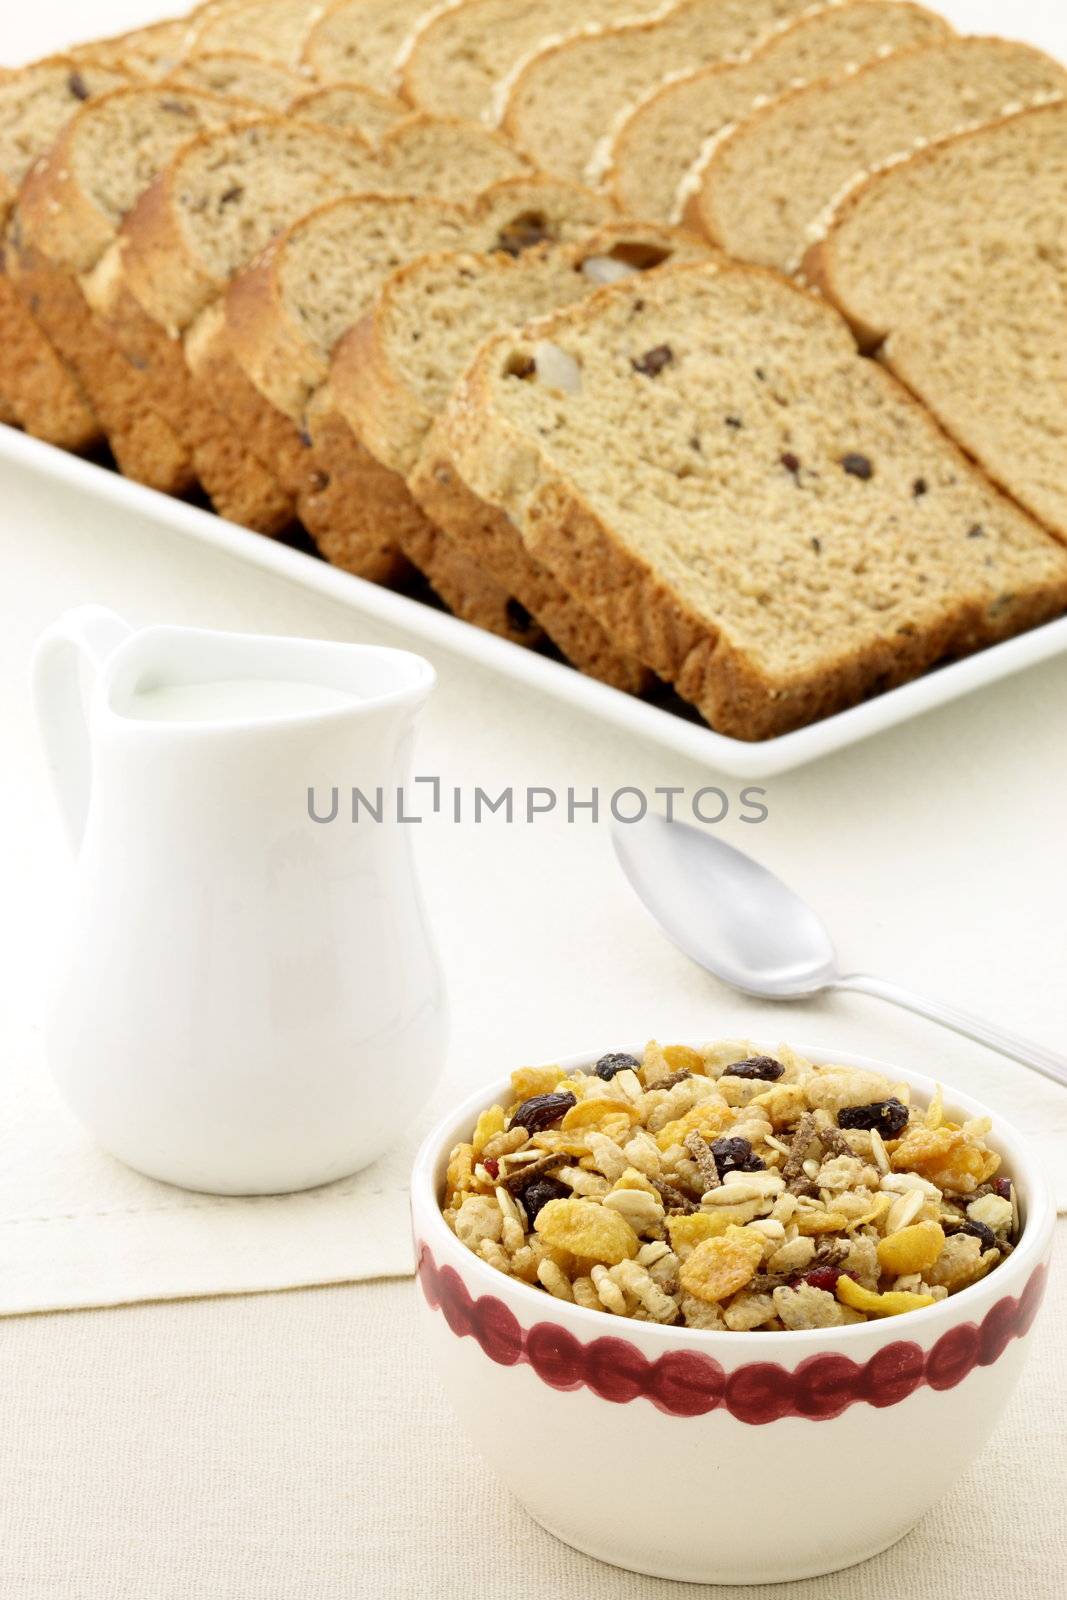 delicious breakfast with whole grain bread,milk and a healthy bowl of granola cereal.